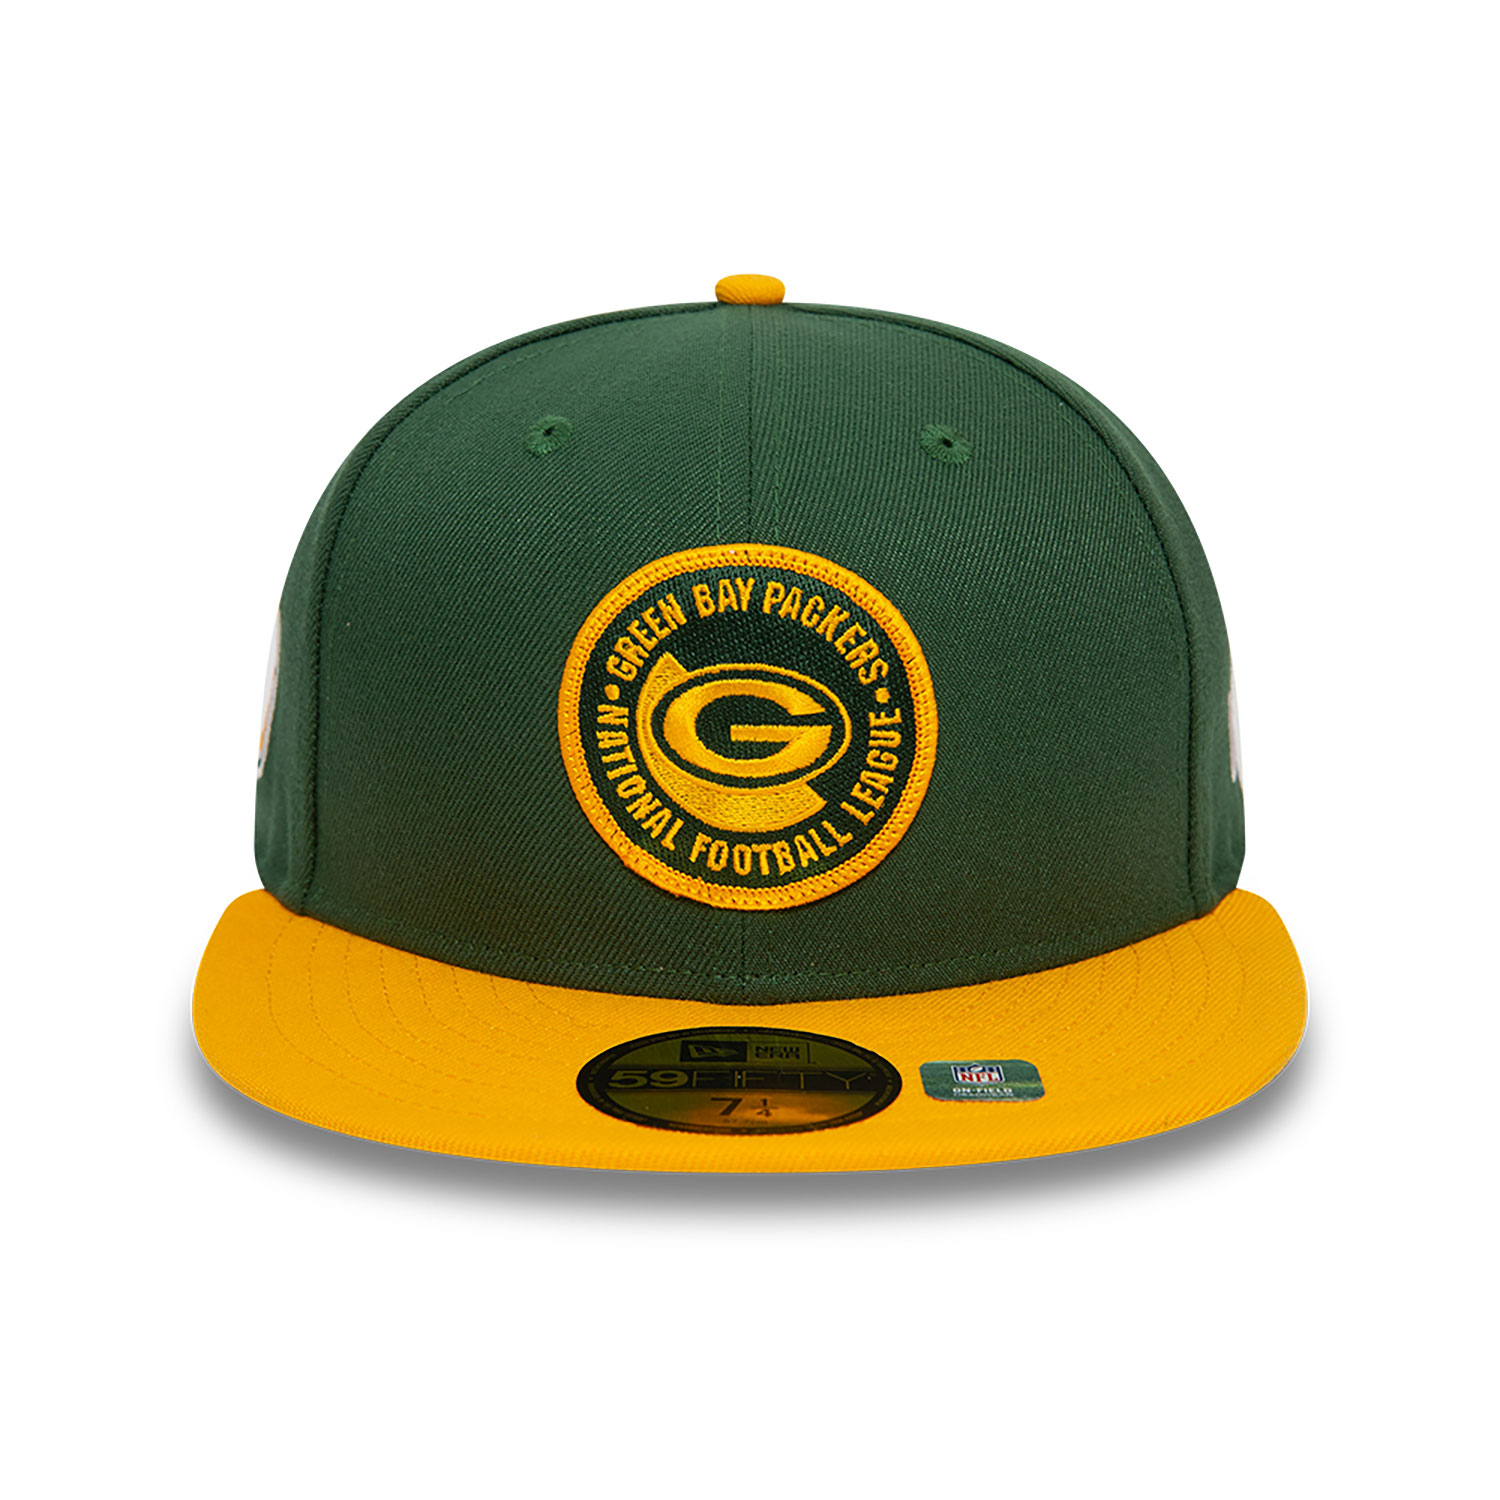 NFL Sideline Green Bay Packers 59FIFTY Fitted Cap D03_287 | New Era Cap GI